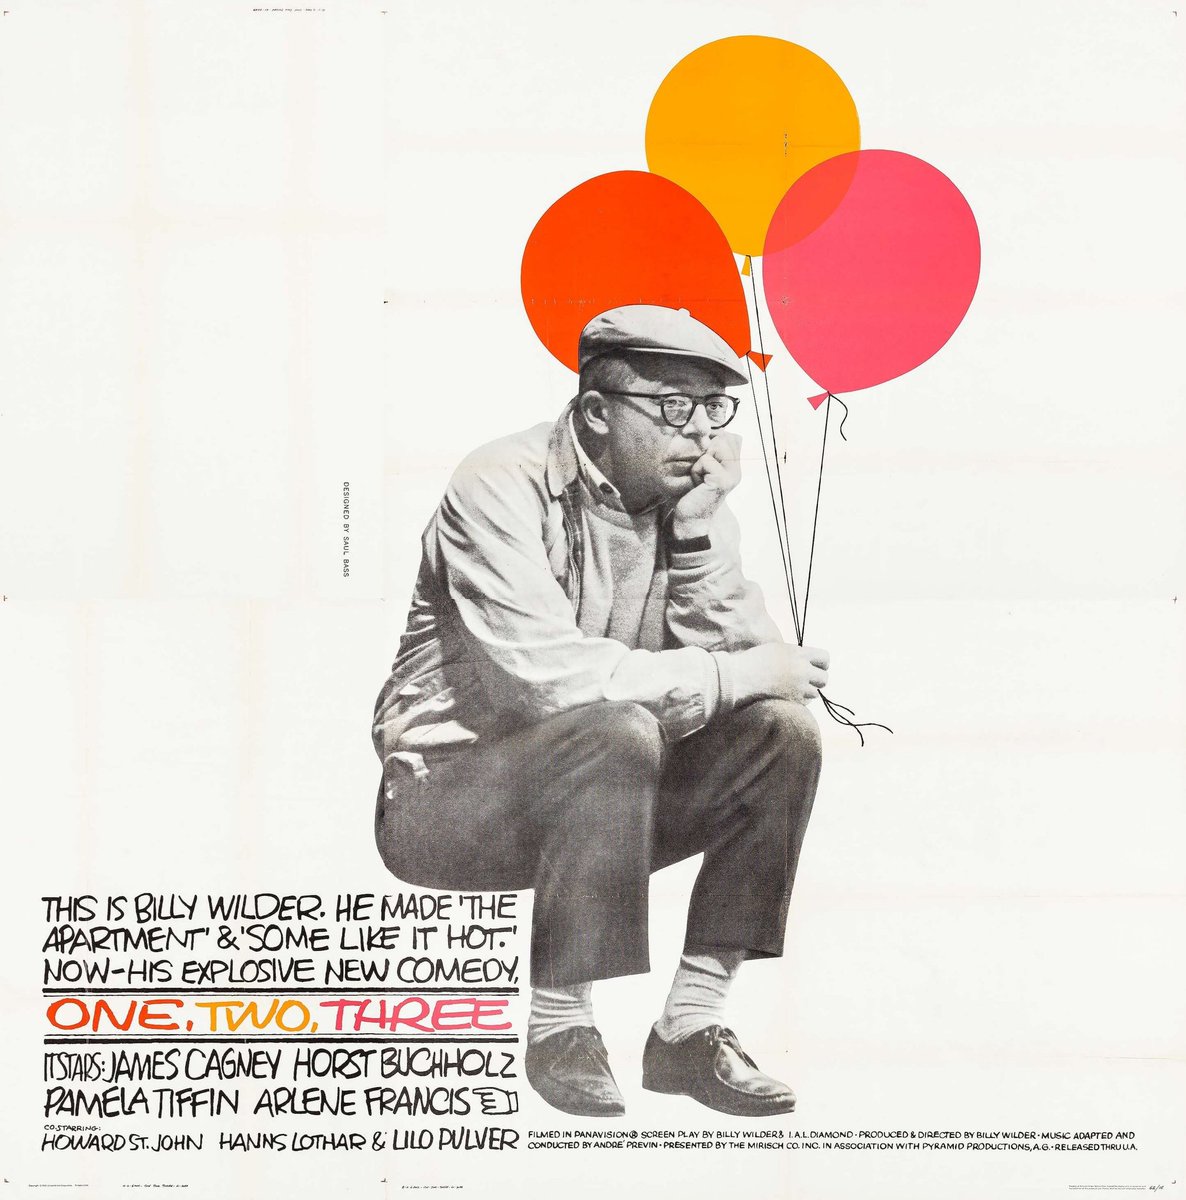 Billy Wilder in a poster for ONE, TWO, THREE (1961). Poster design by Saul Bass #botd